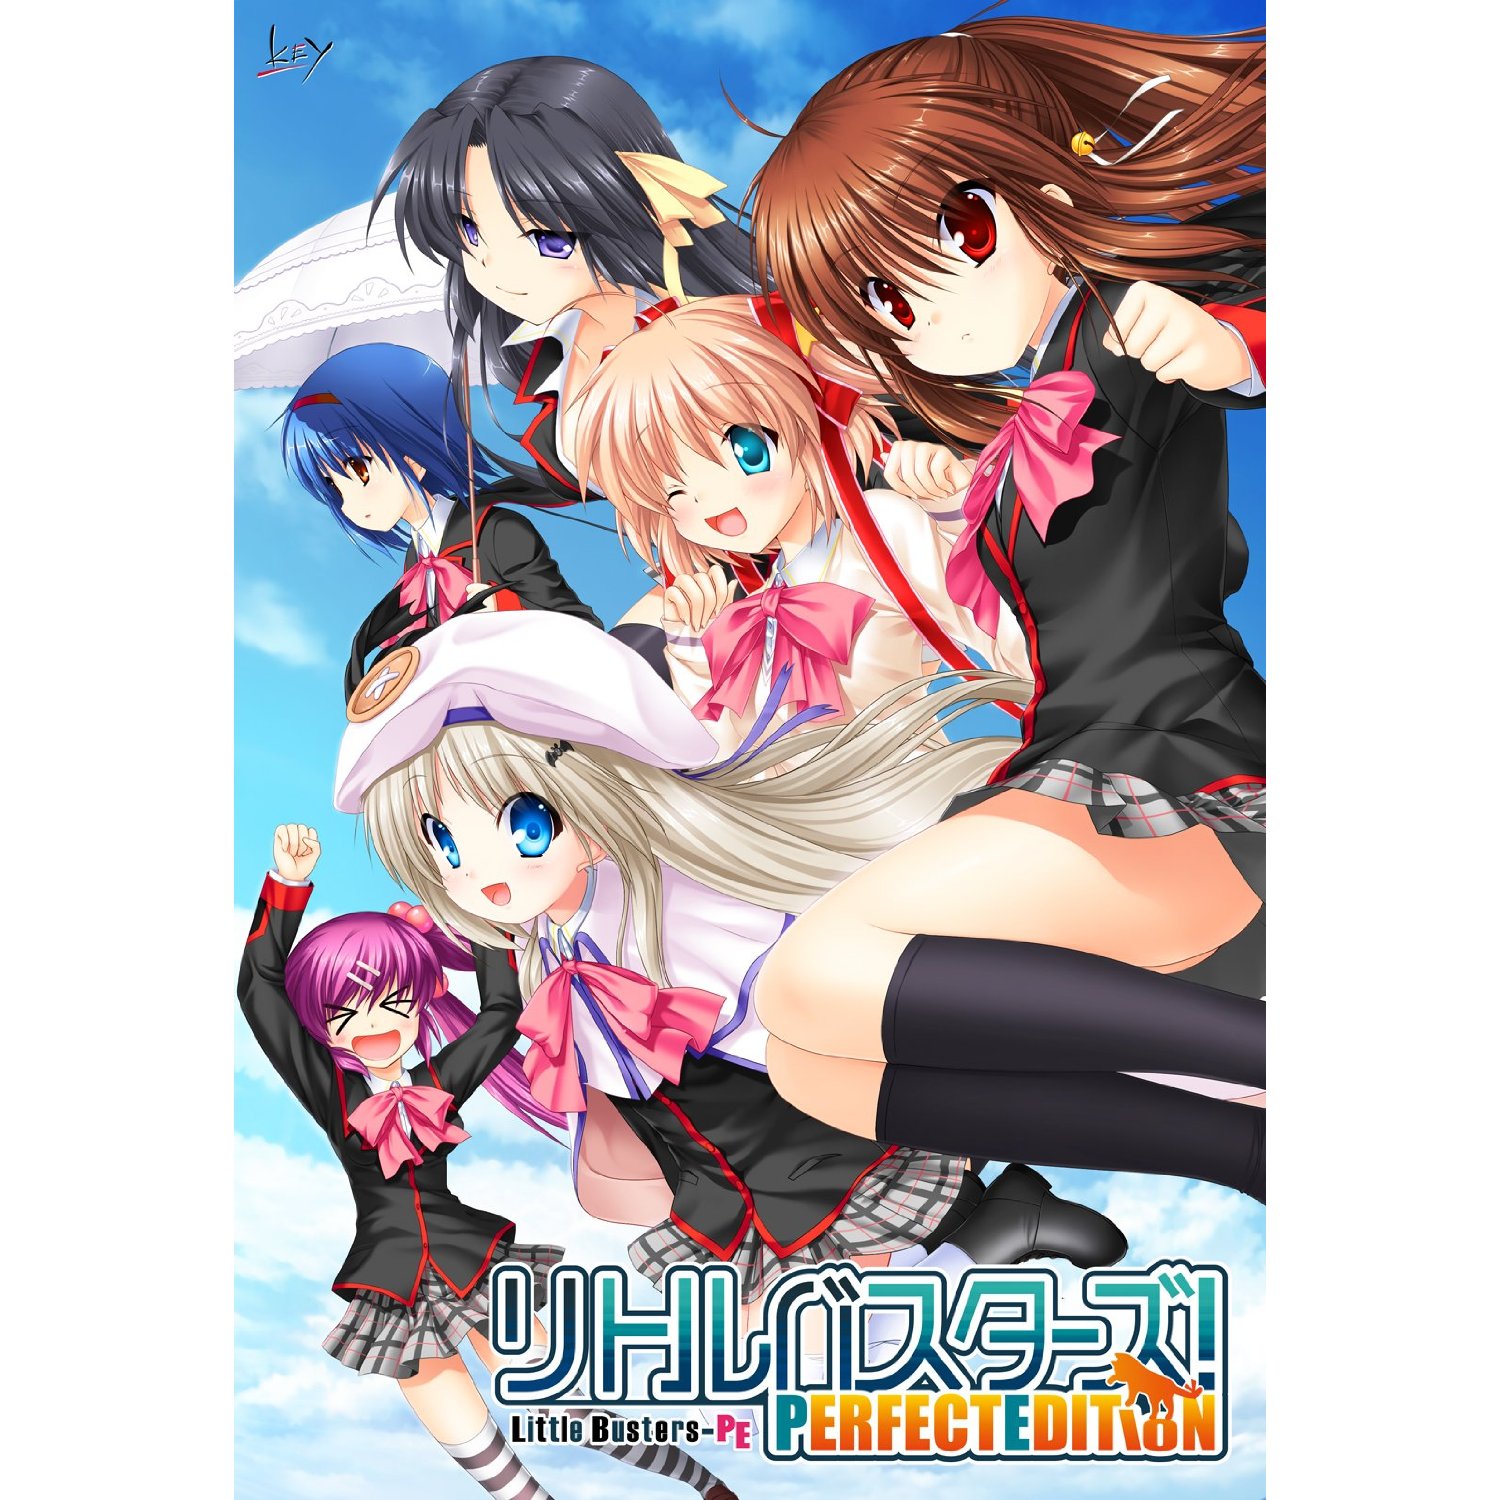 Perfect edition. Little Busters опенинг игры. Little Busters игра в Бейсбол. Little Busters English Edition poster. Yusetsu.